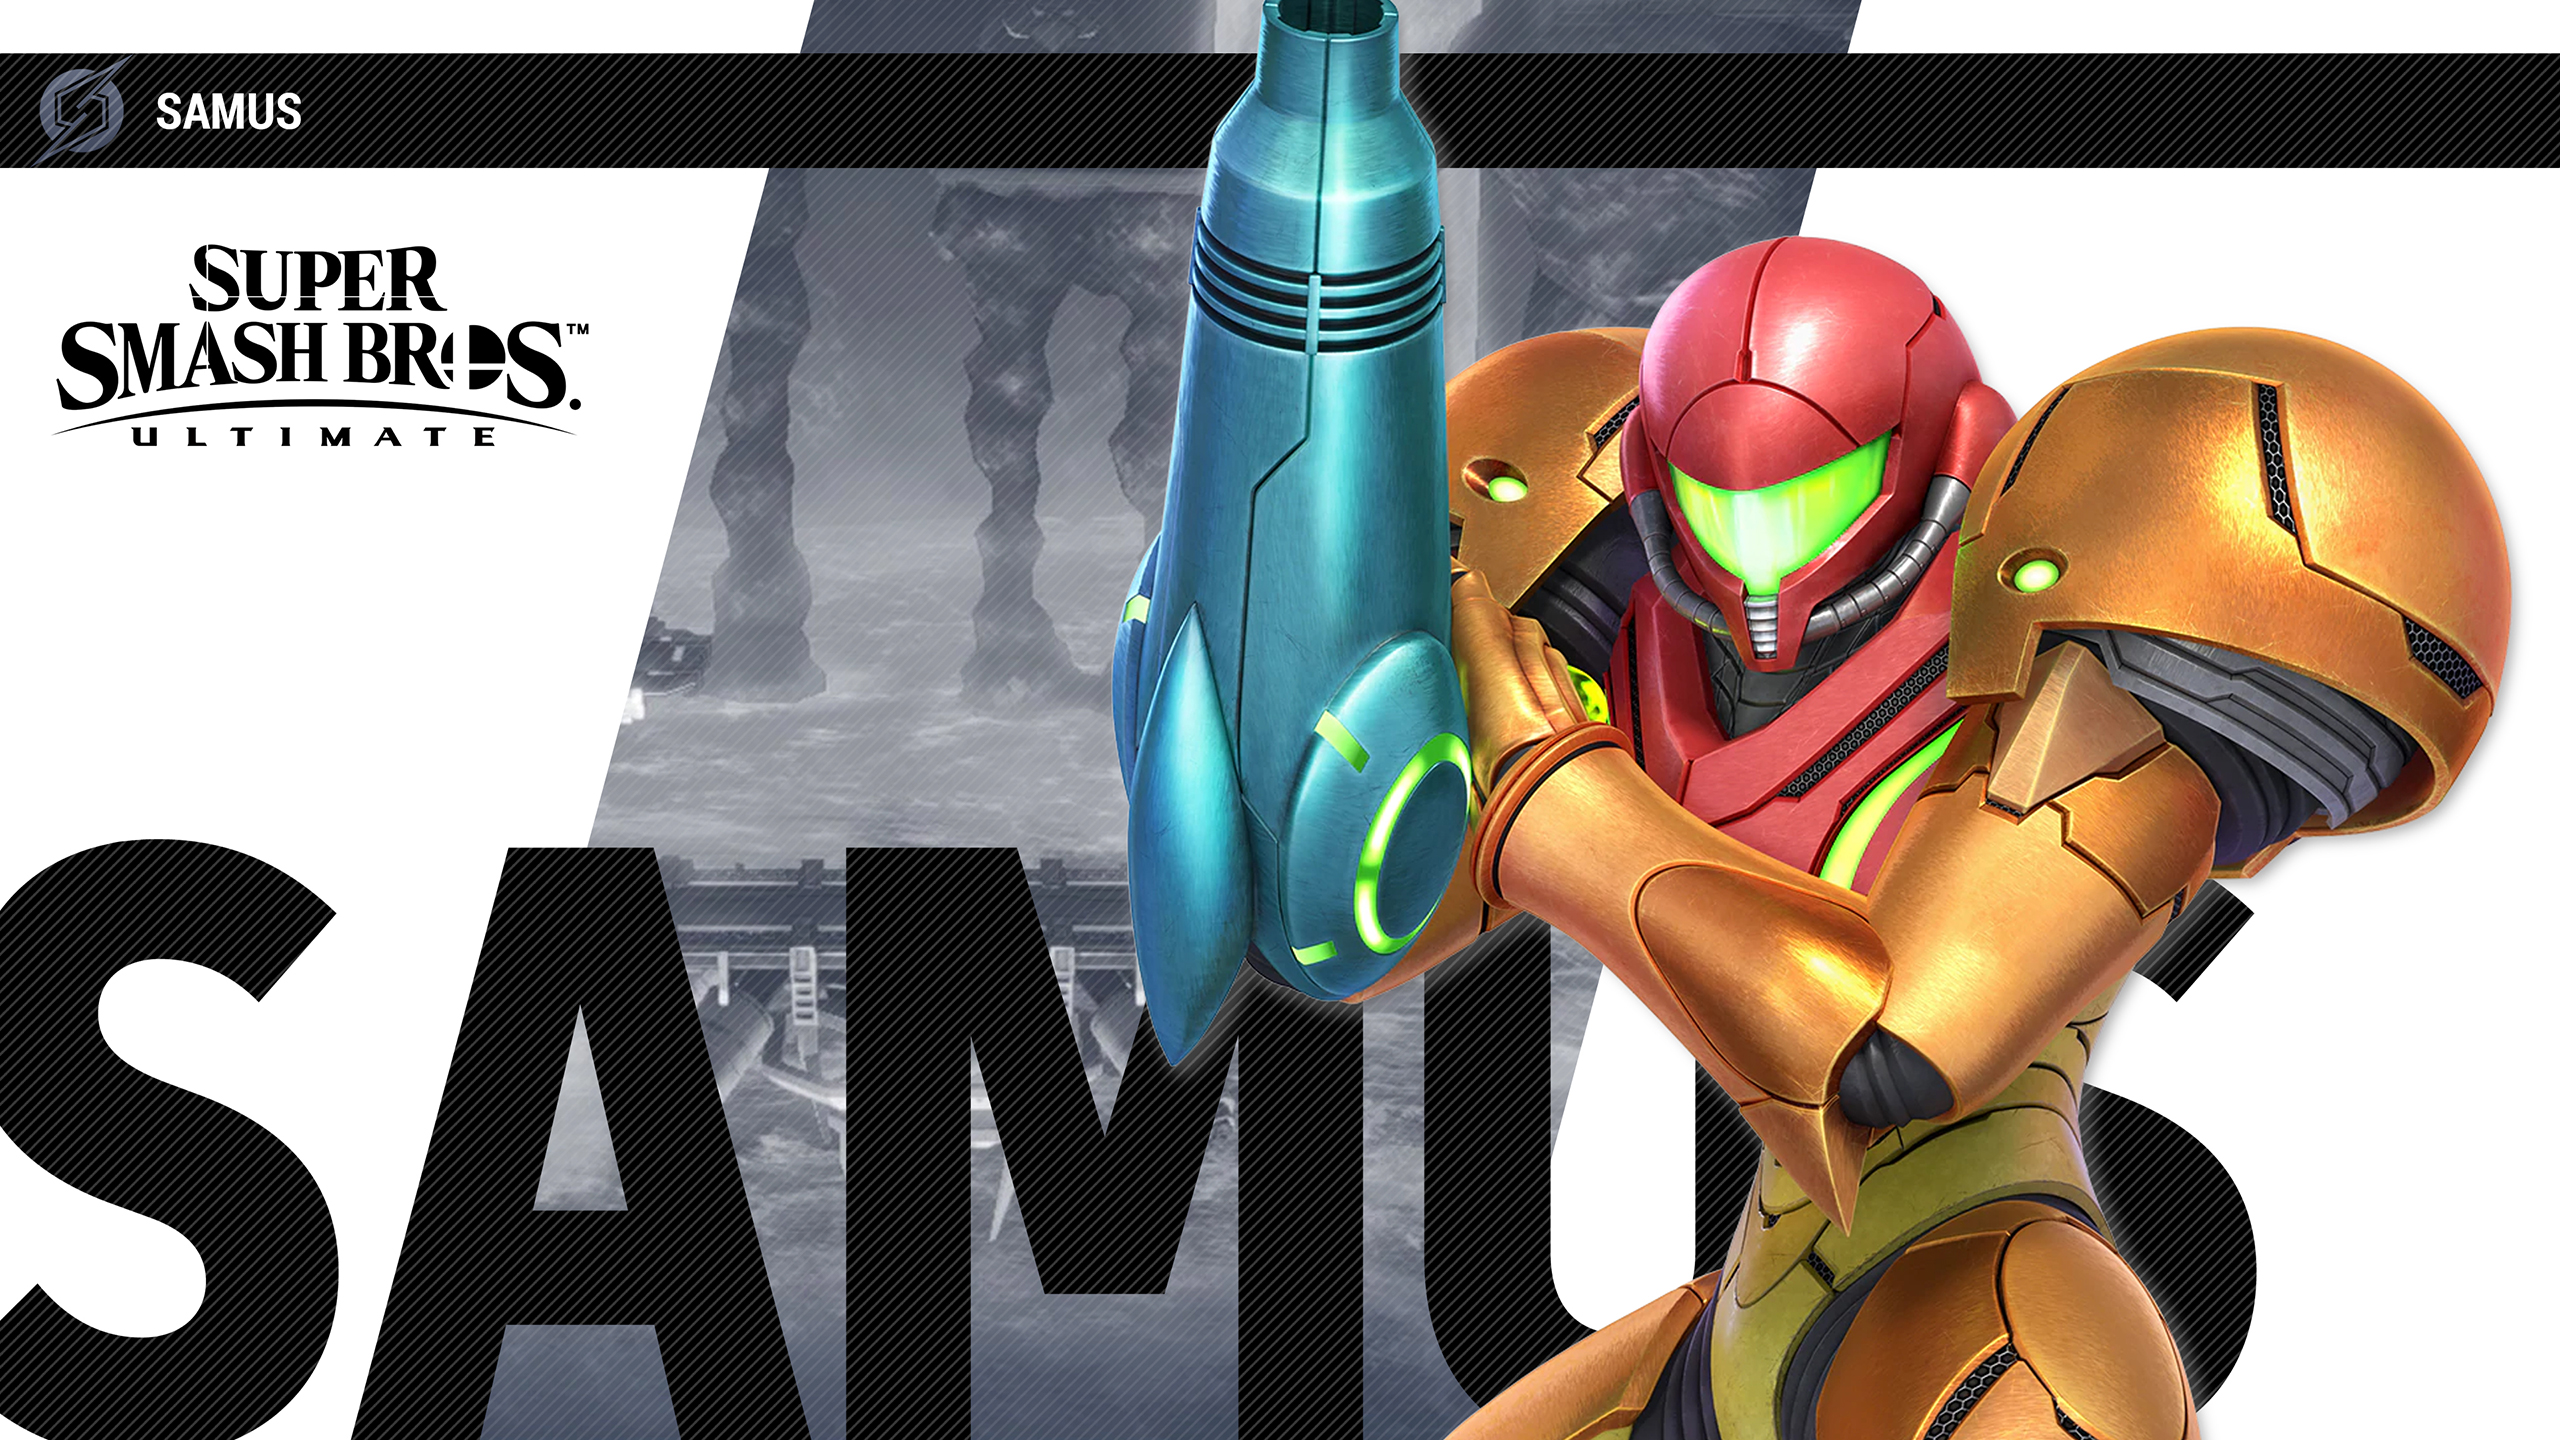 Super Smash Bros Ultimate Samus Wallpapers | Cat with Monocle